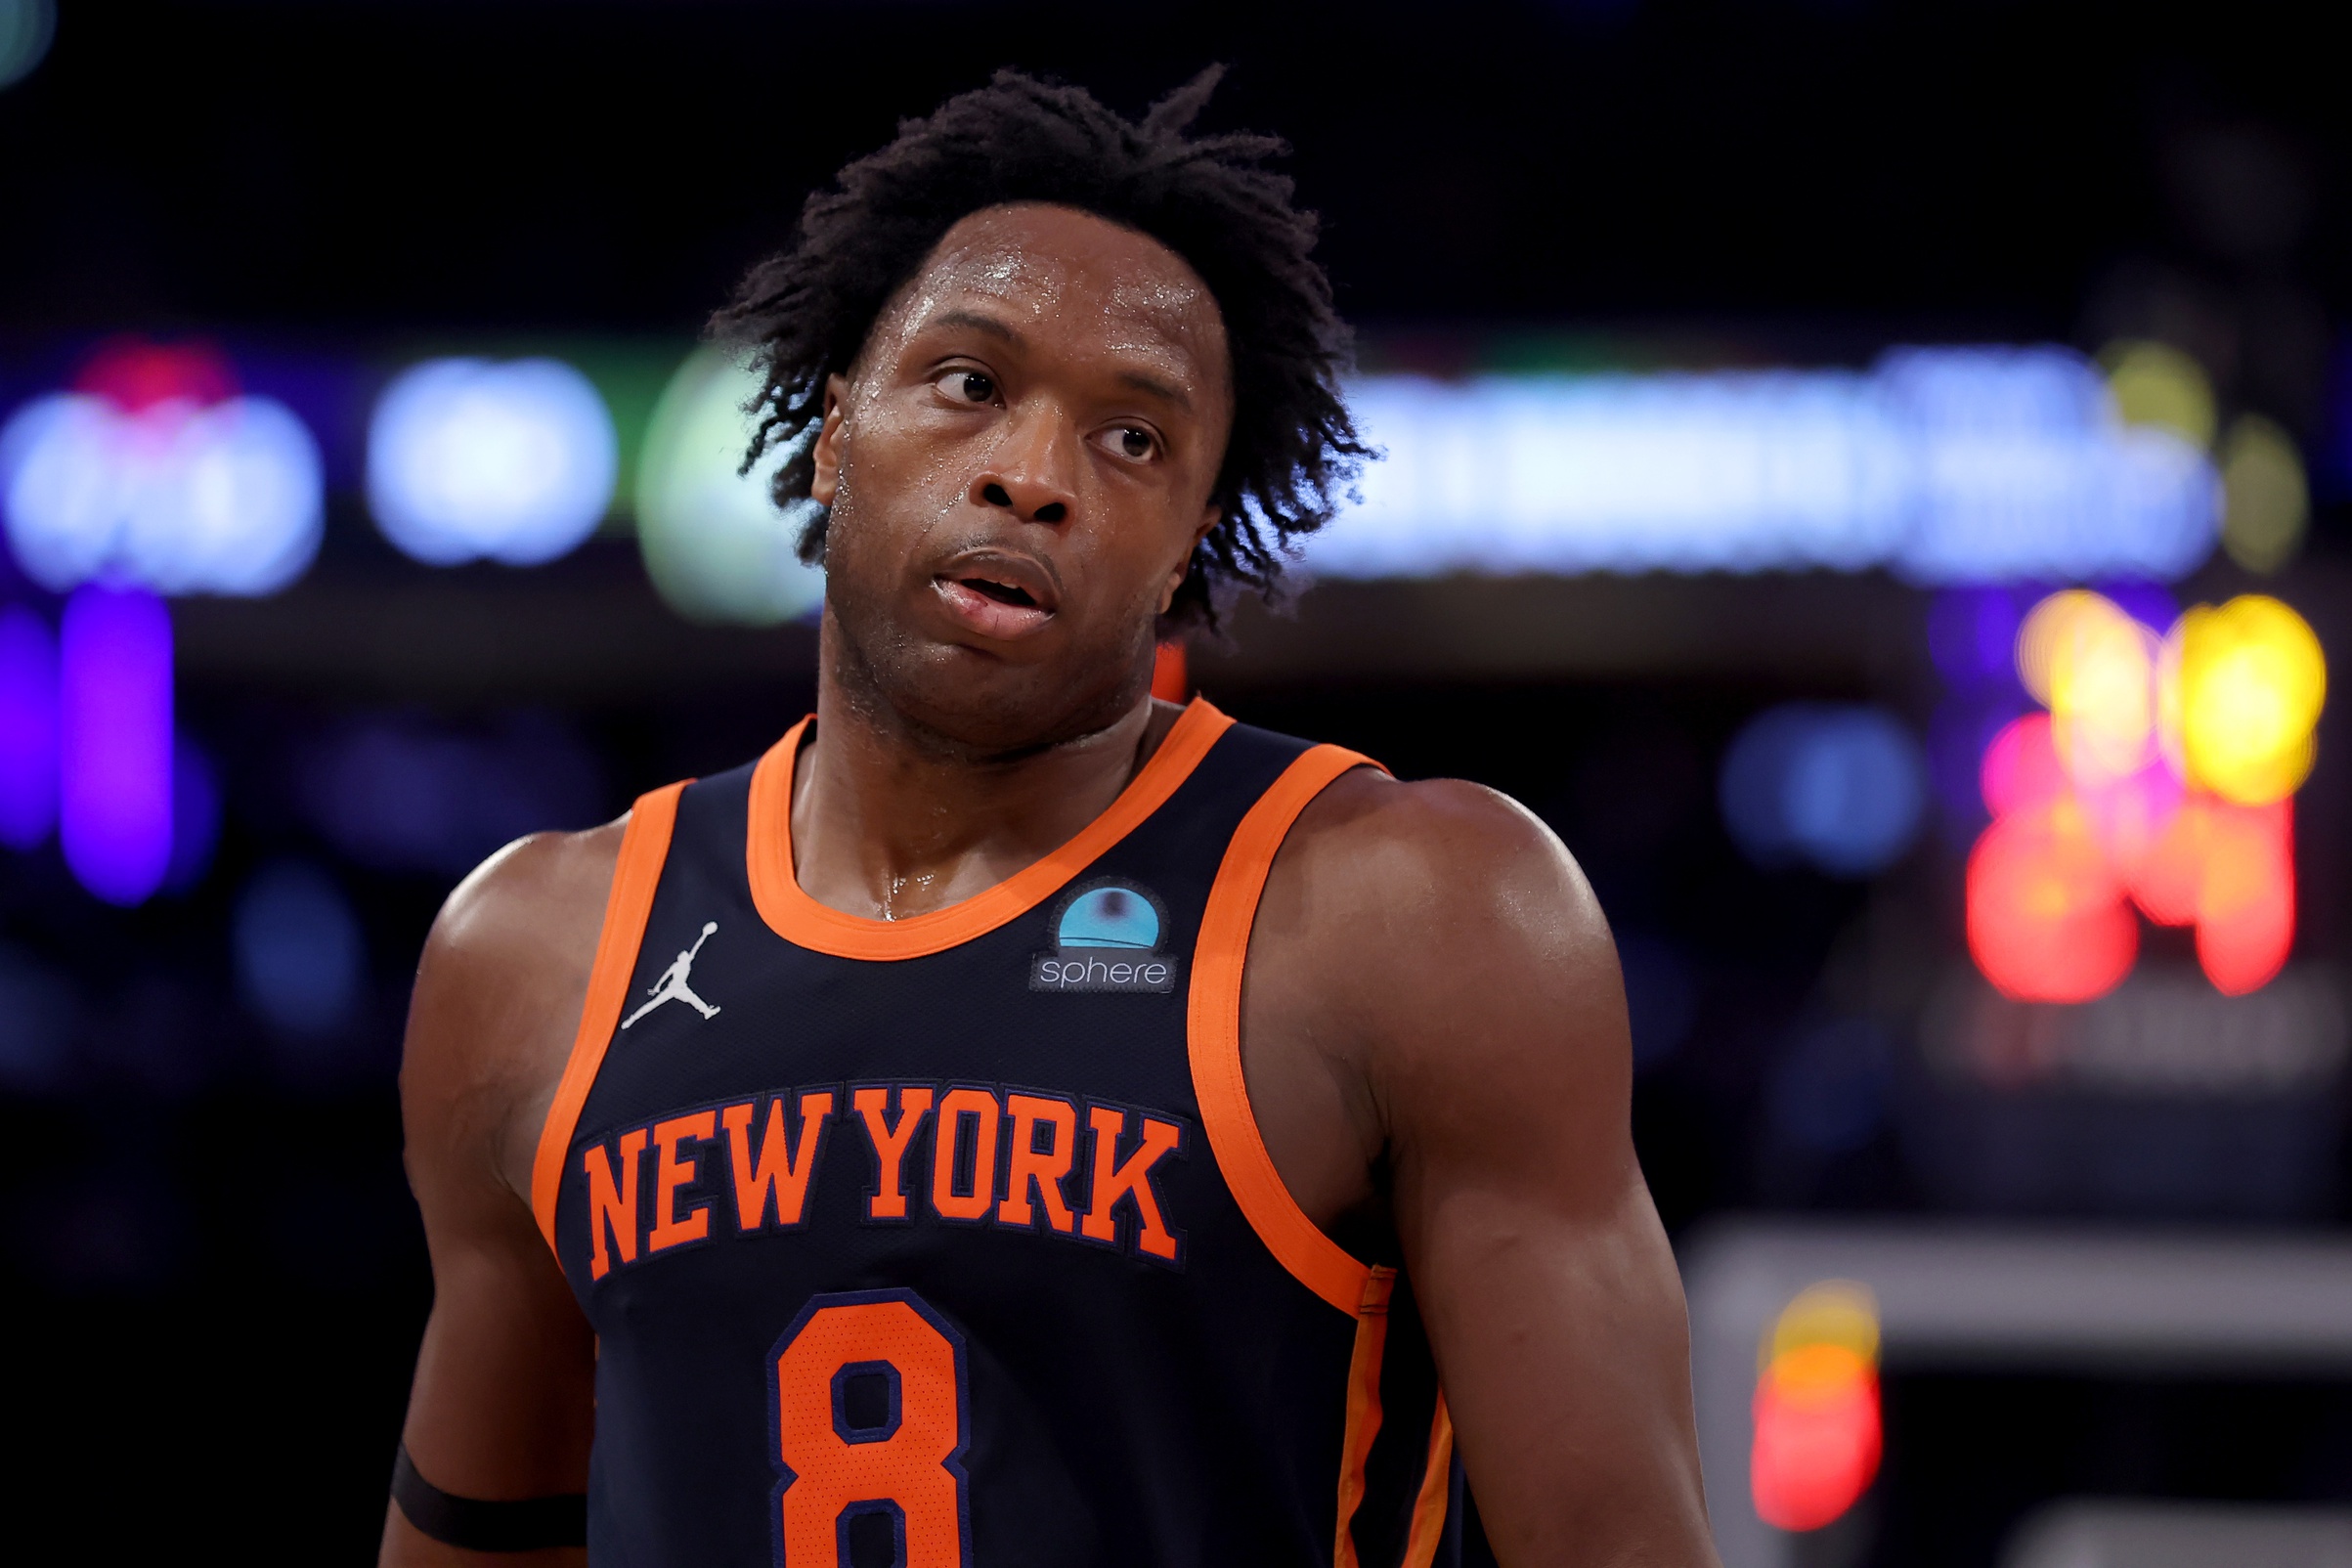 OG Anunoby could return tonight after a month long injury.